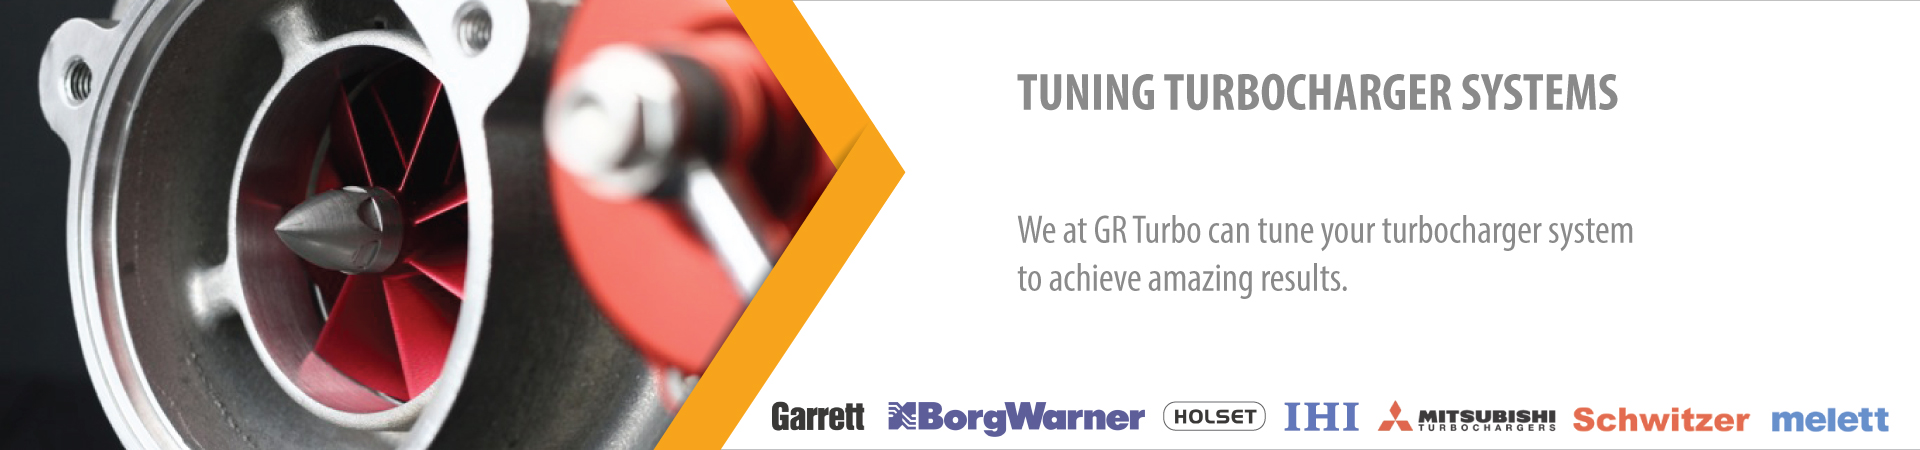 We at GR Turbo can tune your turbocharger system to achieve amazing results.